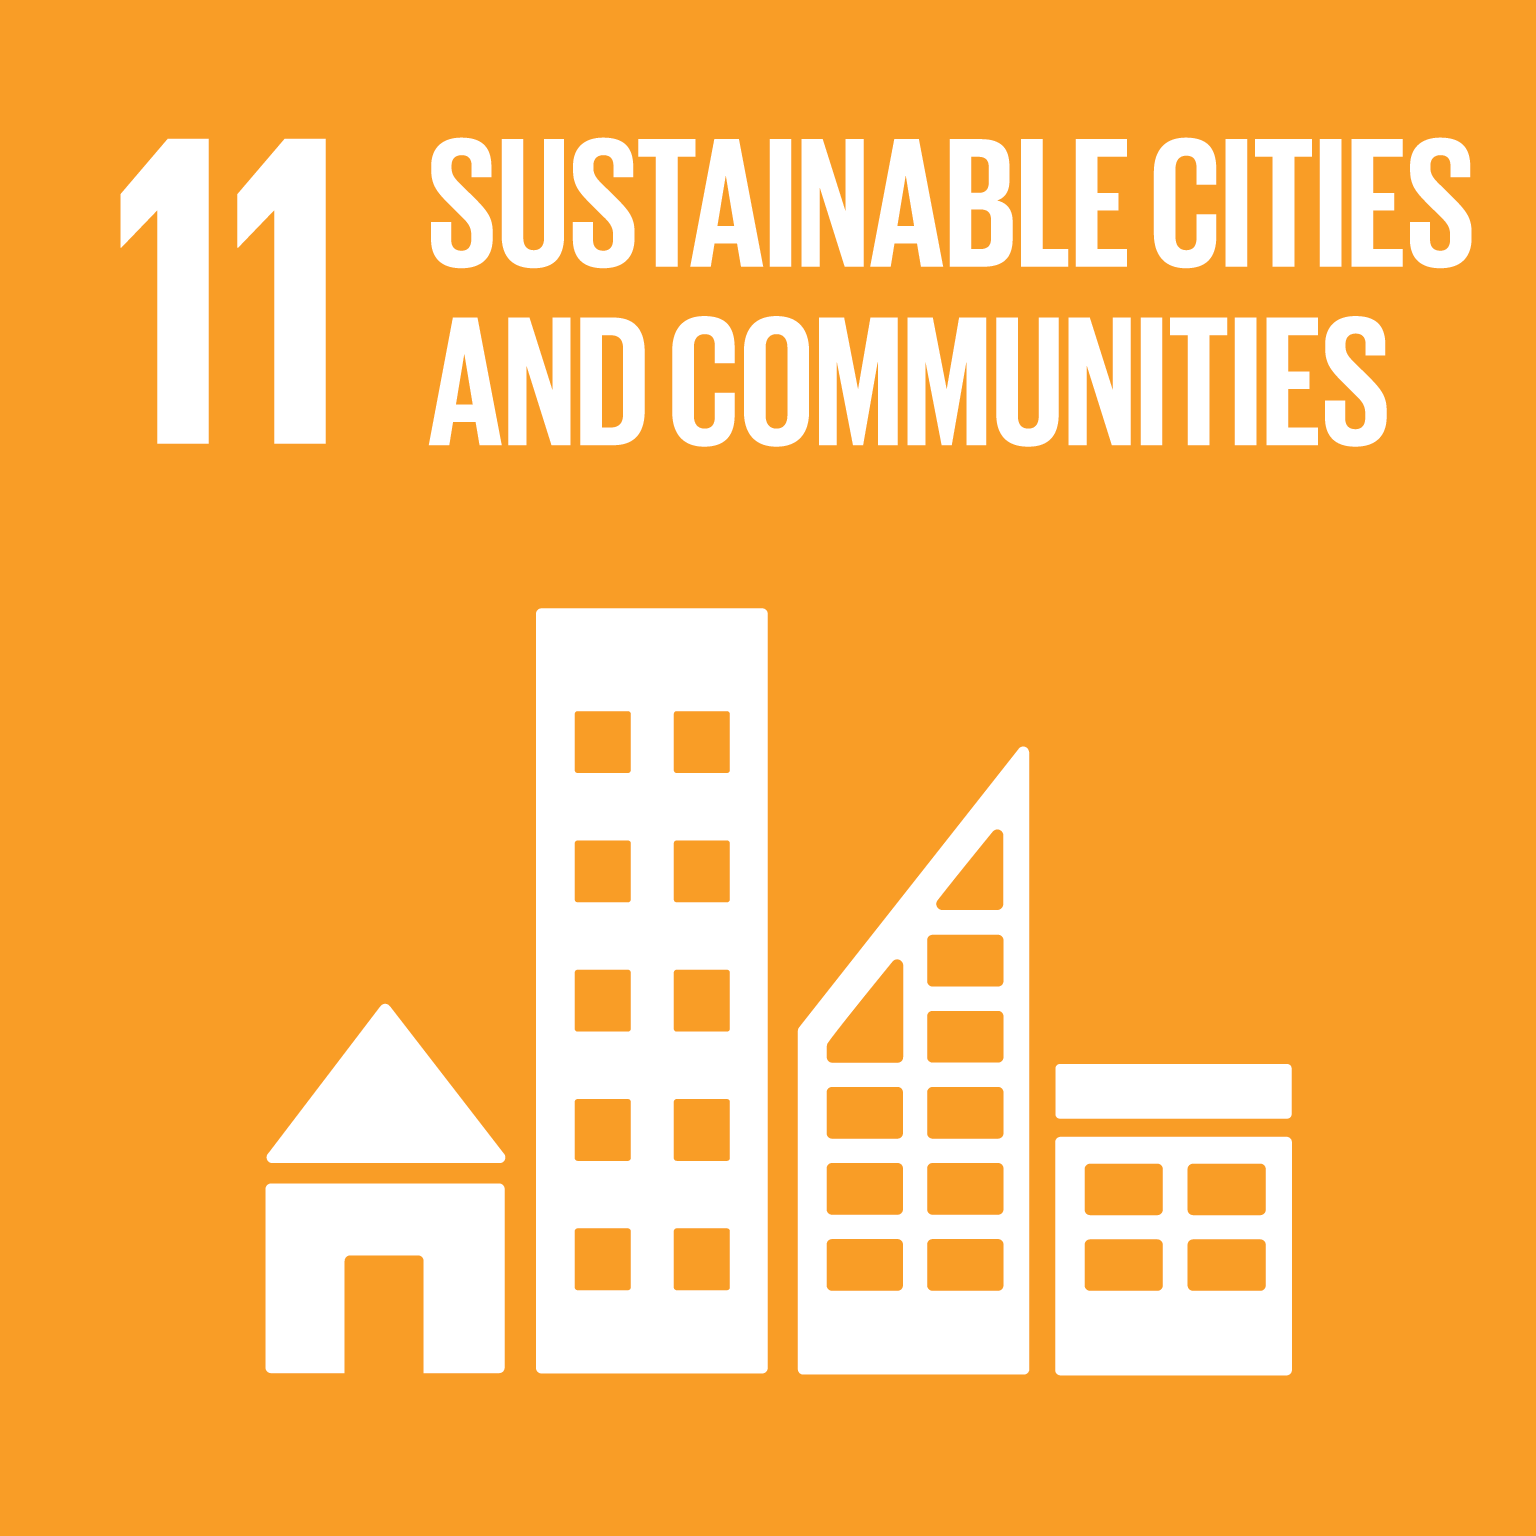 Goal 11: Sustainable Communities, the text of this infographic is listed below